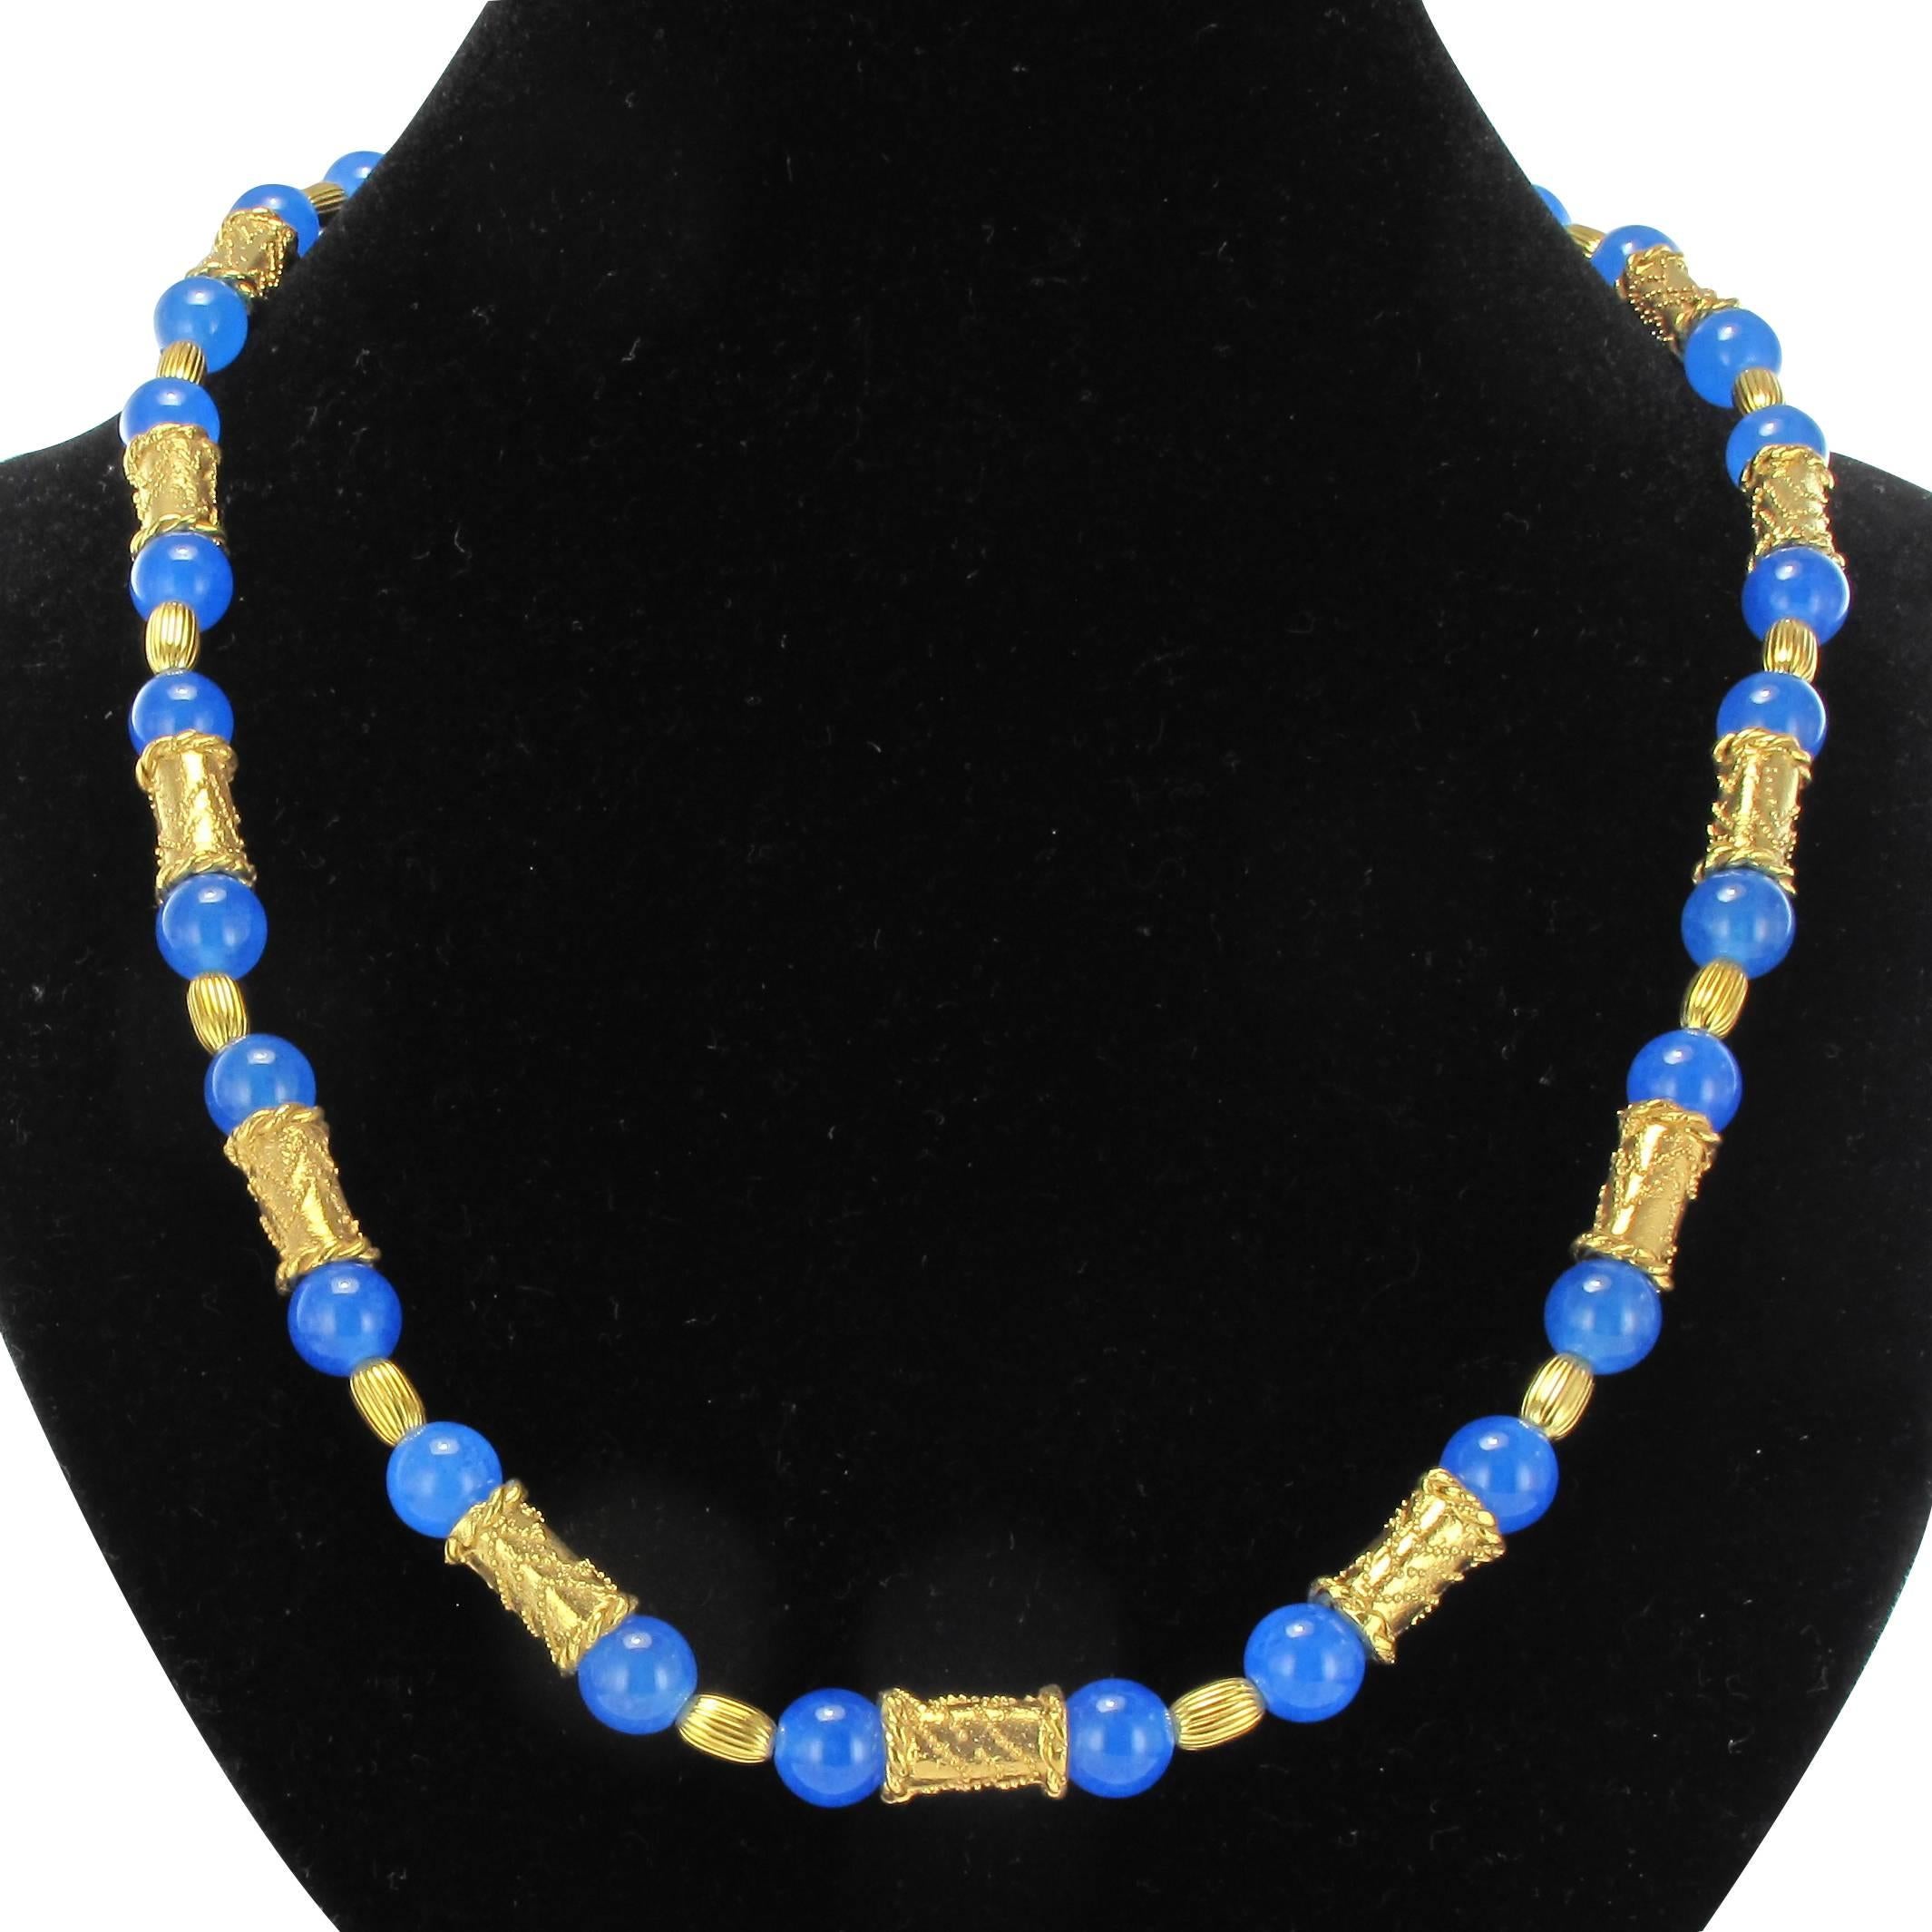 Necklace in vermeil, silver and yellow gold.

It is made of blue glass beads separated by gilt silver motifs carved in the spirit of Etruscan art and of ribbed vermilion beads of olive shape, the necklace ending in a chain allowing to adapt the